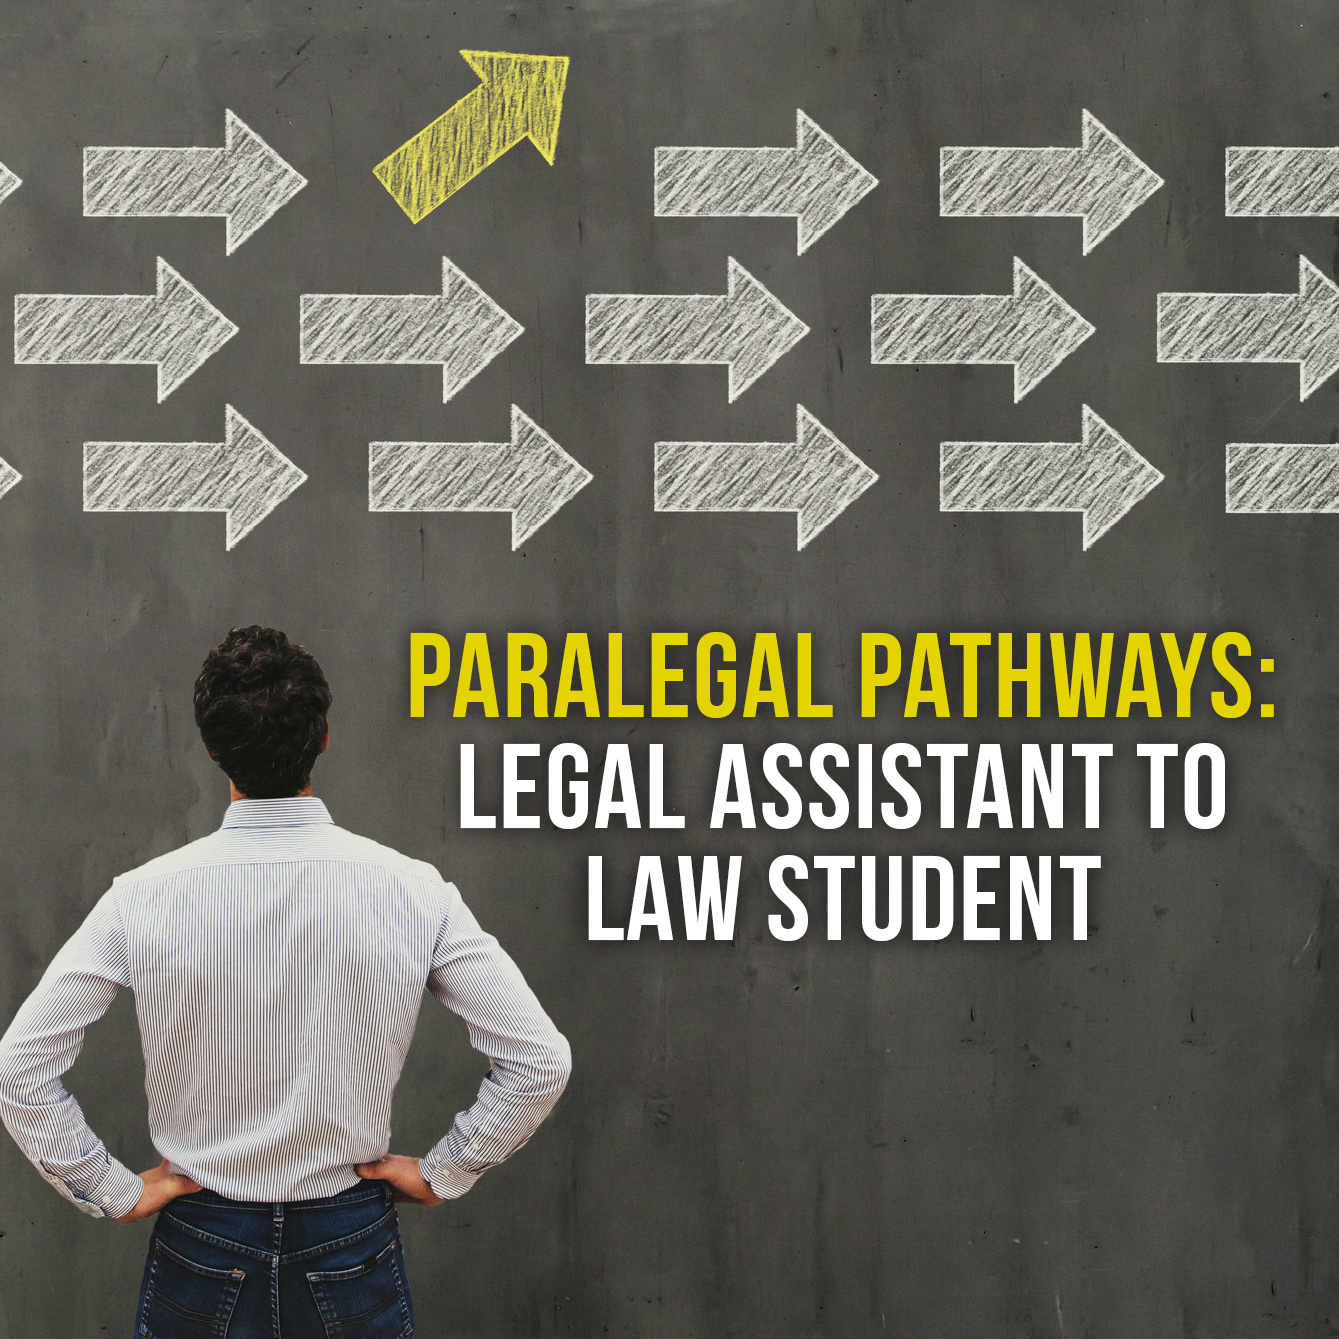 Paralegal Pathway Article